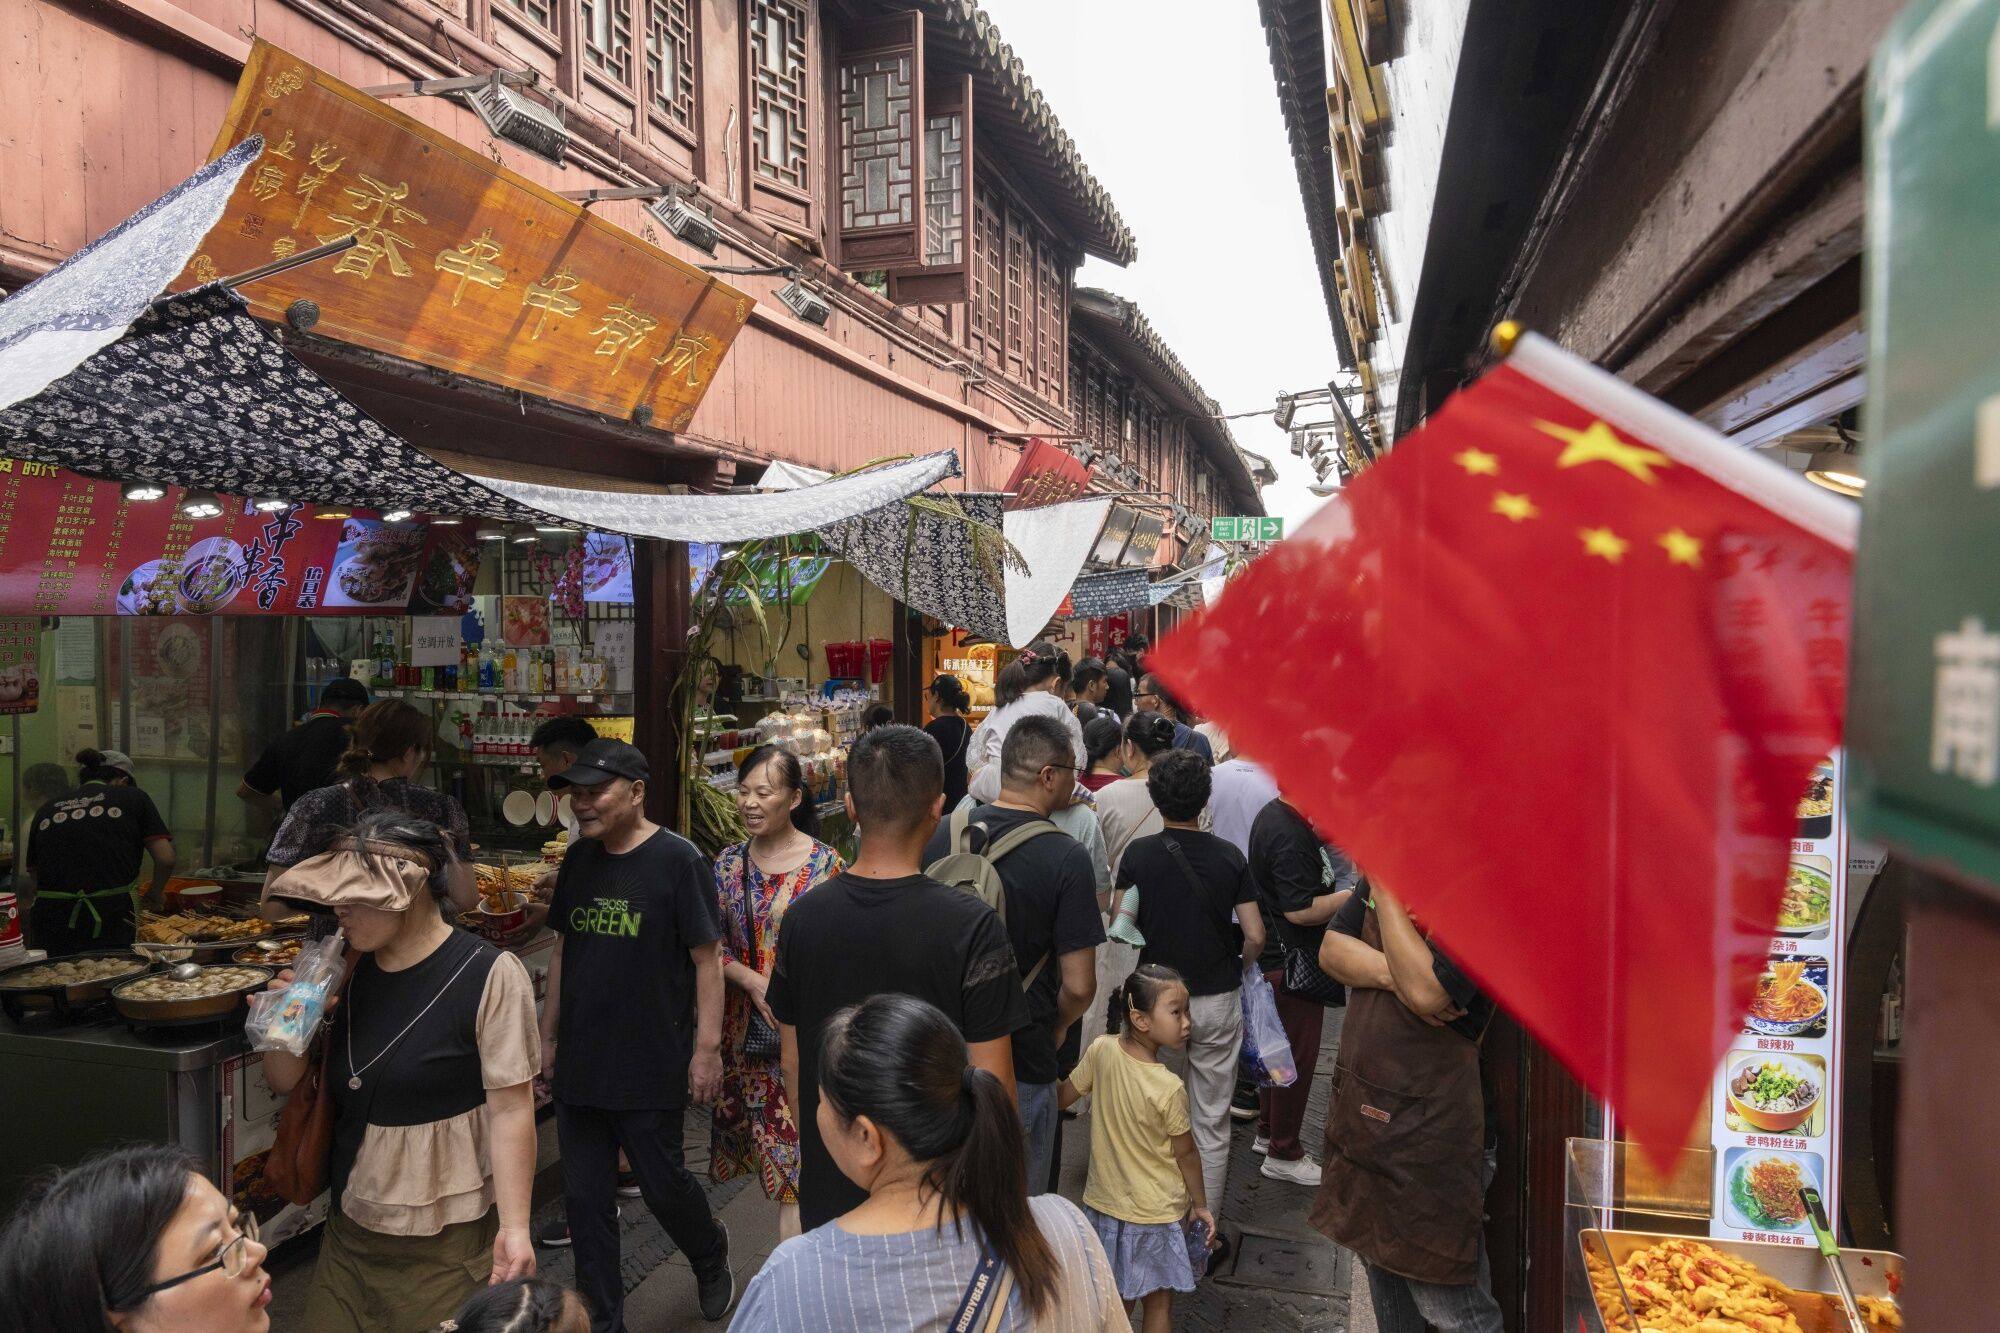 China’s retail sales grew by 5.5 per cent in September, compared with 4.6 per cent growth in August. Photo: Bloomberg